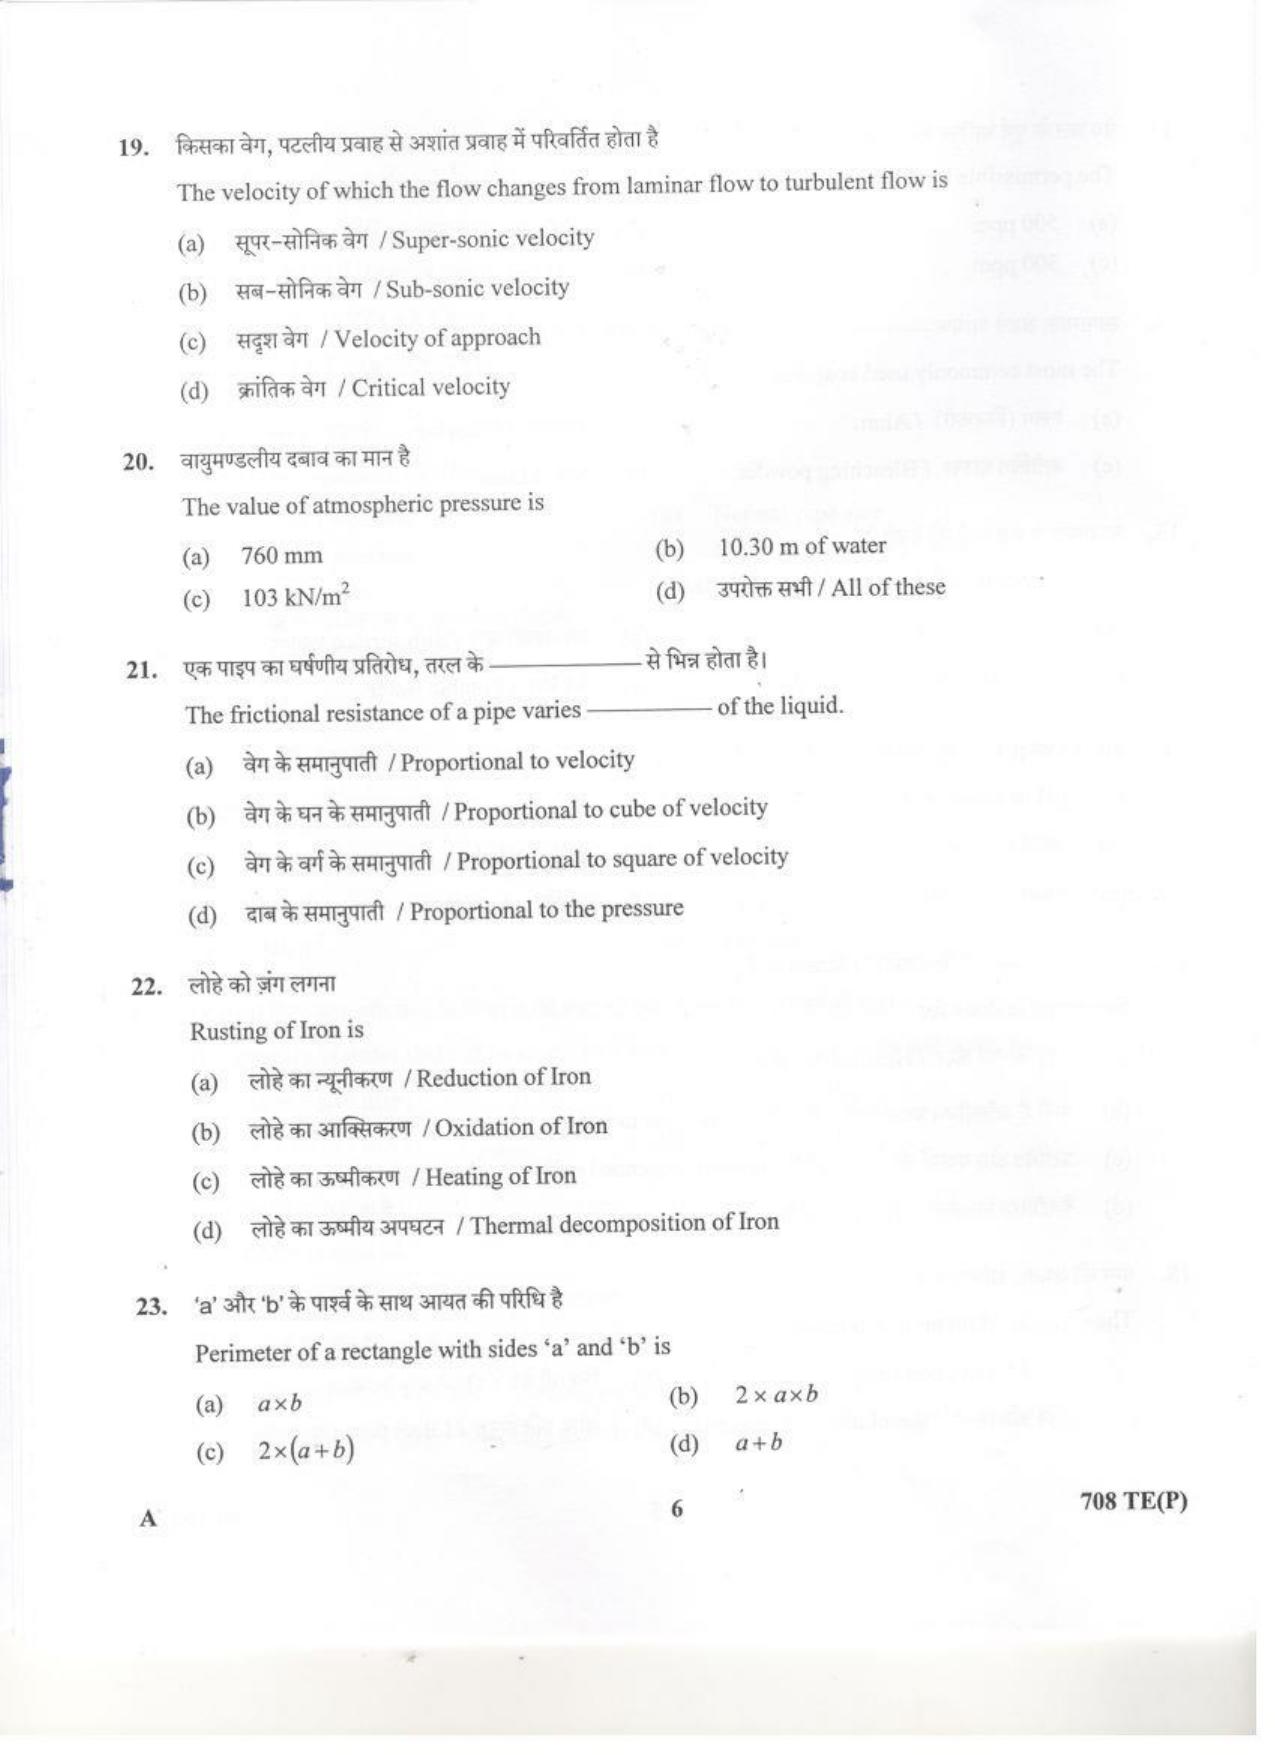 LPSC Technician ‘B’ (Plumber) 2020 Question Paper - Page 5